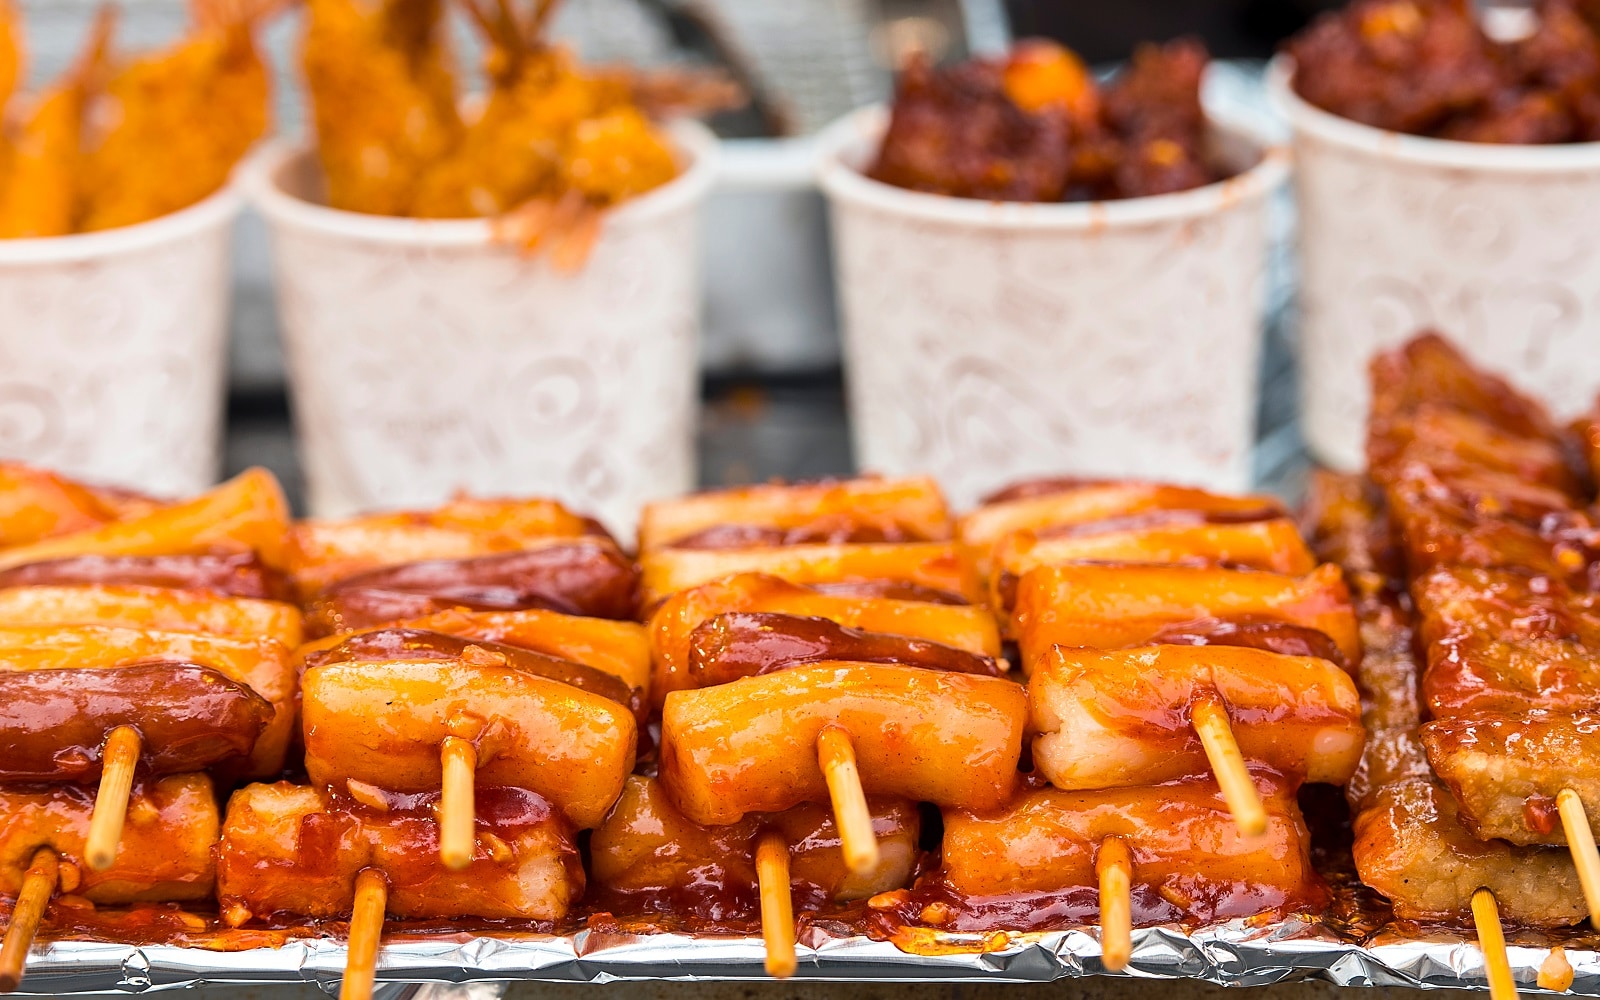 Image Credit: Shutterstock / Savvapanf Photo <p>Your taste buds will embark on their own journey, from initial skepticism of local delicacies to unabashed cravings for that street food you once side-eyed.</p>